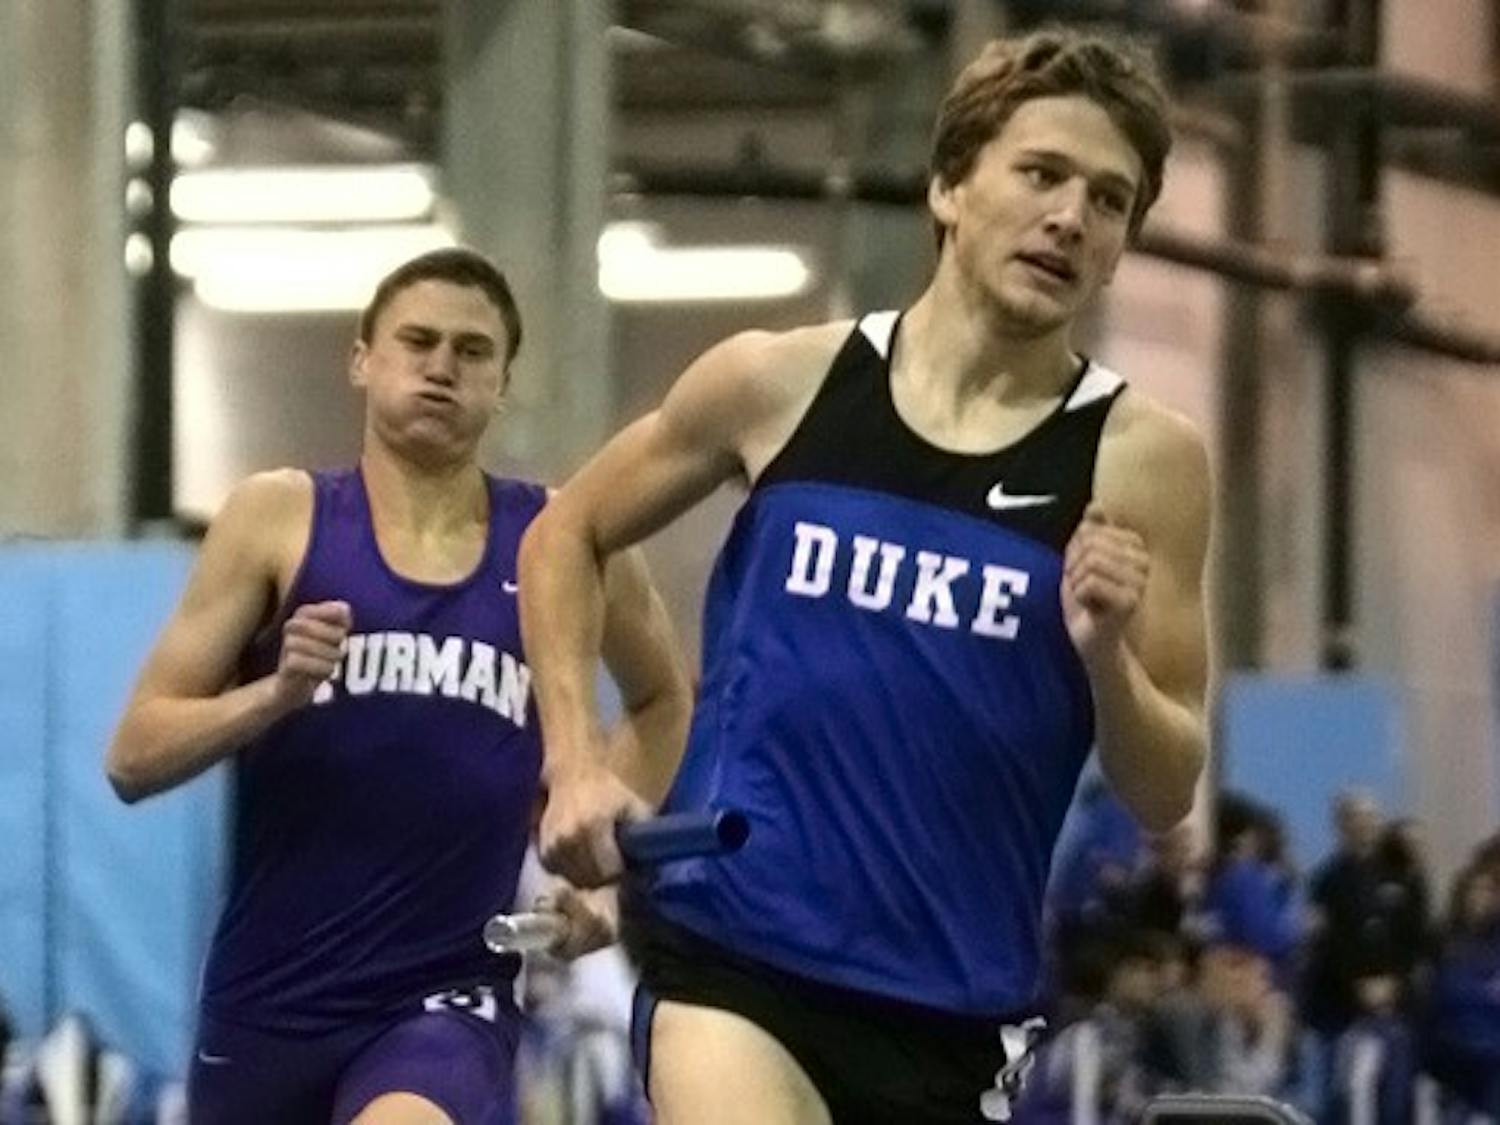 Nate McClafferty’s leg in the distance medley relay helped Duke to a comeback win.